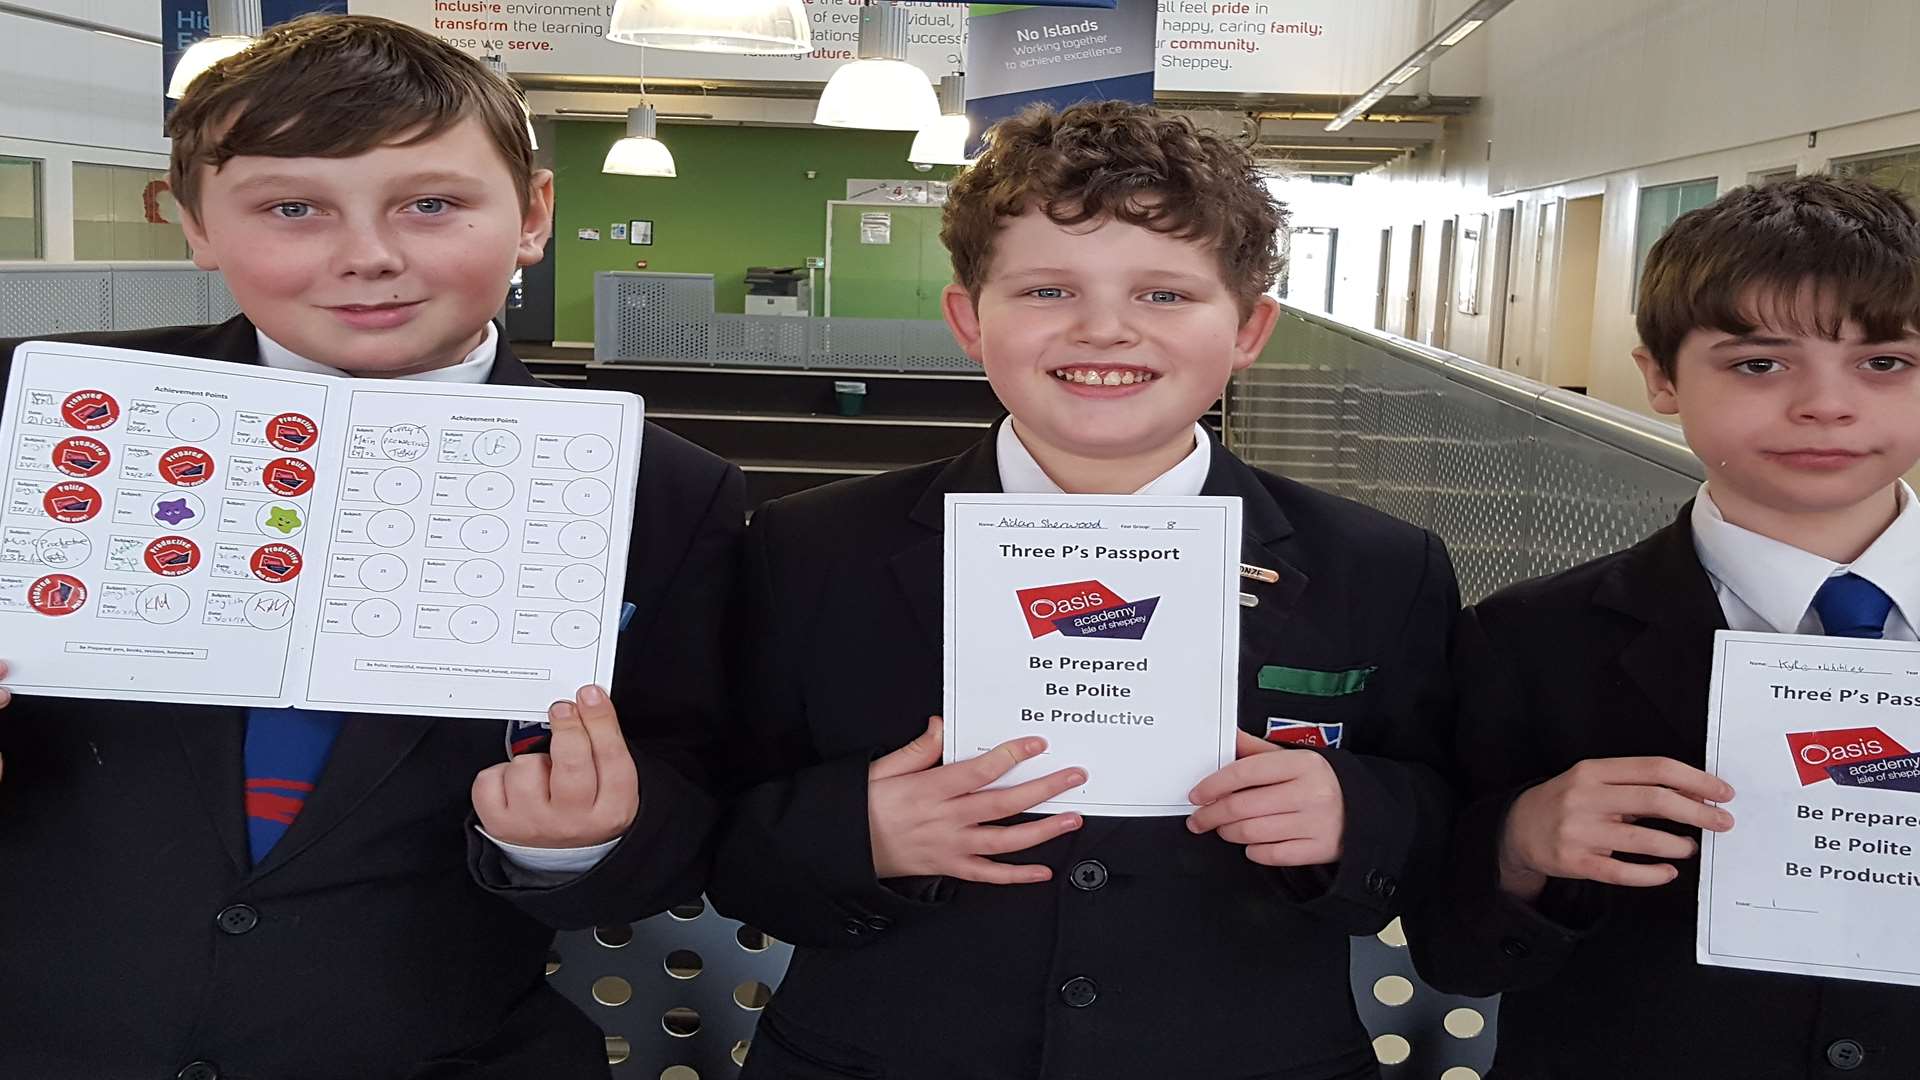 The passport has had a mixed reaction: Pupils Cody Hester, 13, Aidan Sherwood, 12, and Kyle Whibley, also 12